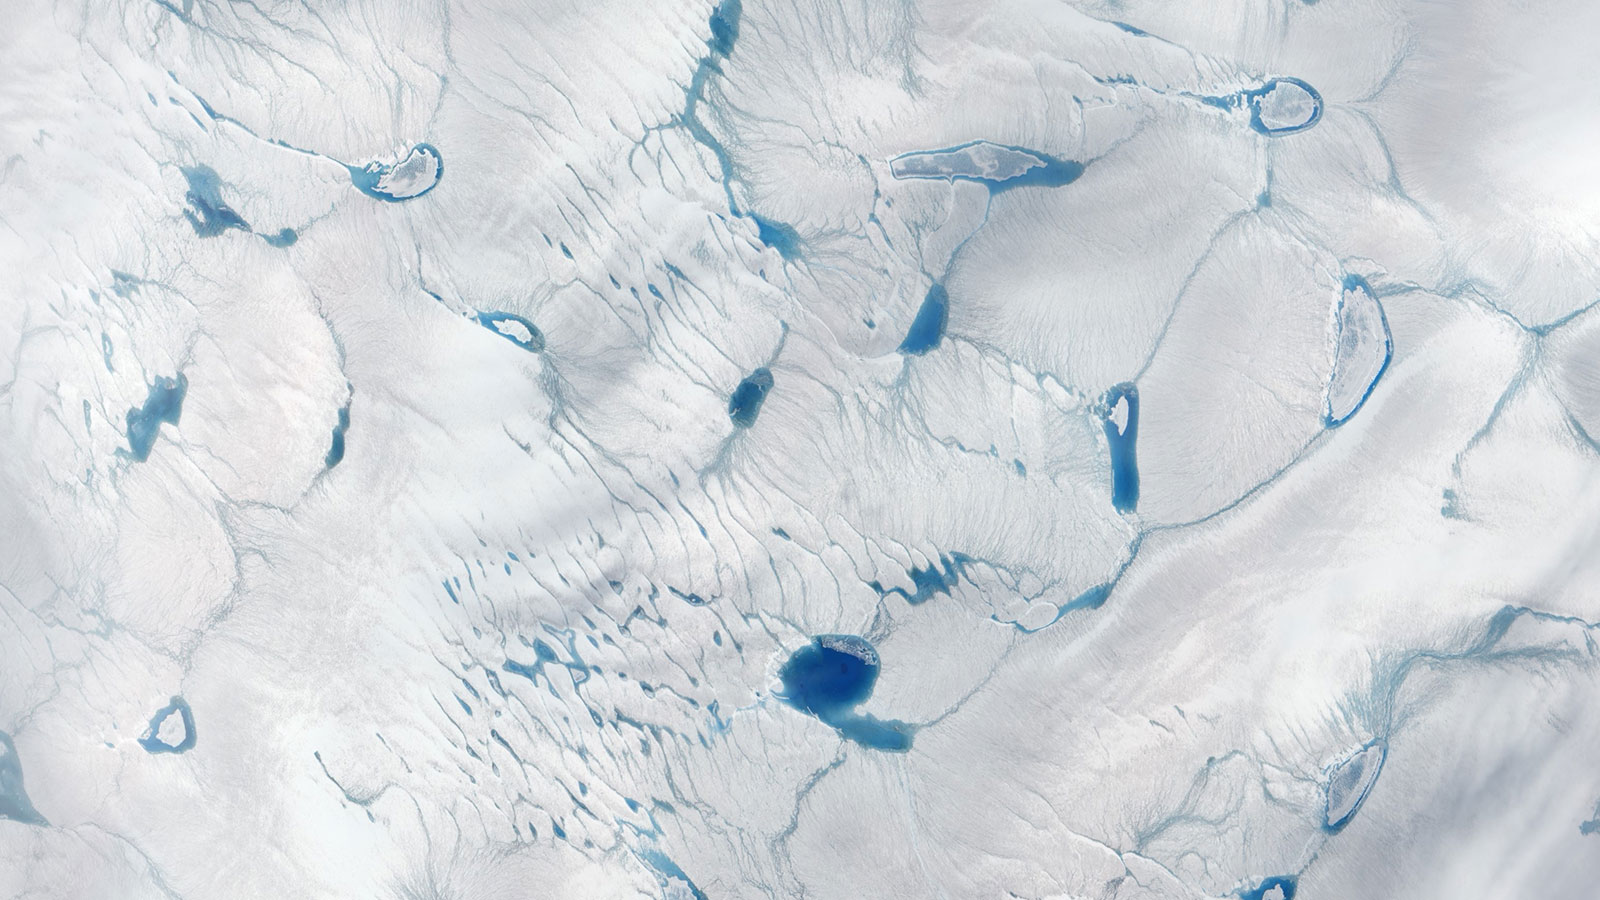 Pools of meltwater in southwestern Greenland's ice sheet